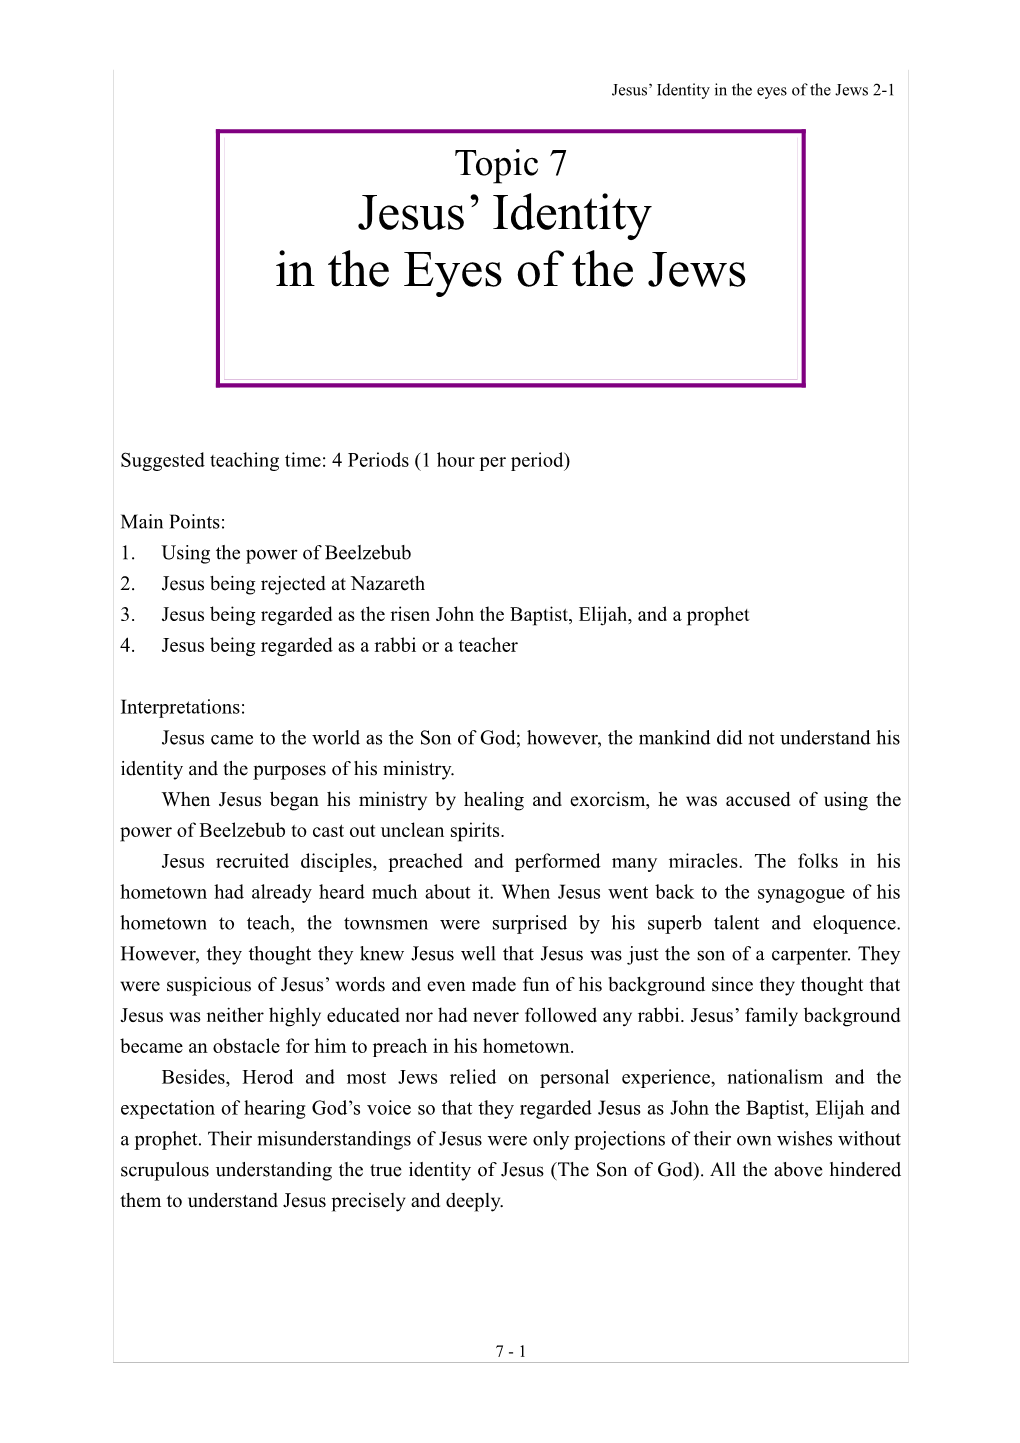 Jesus Identity in the Eyes of the Jews 2-1